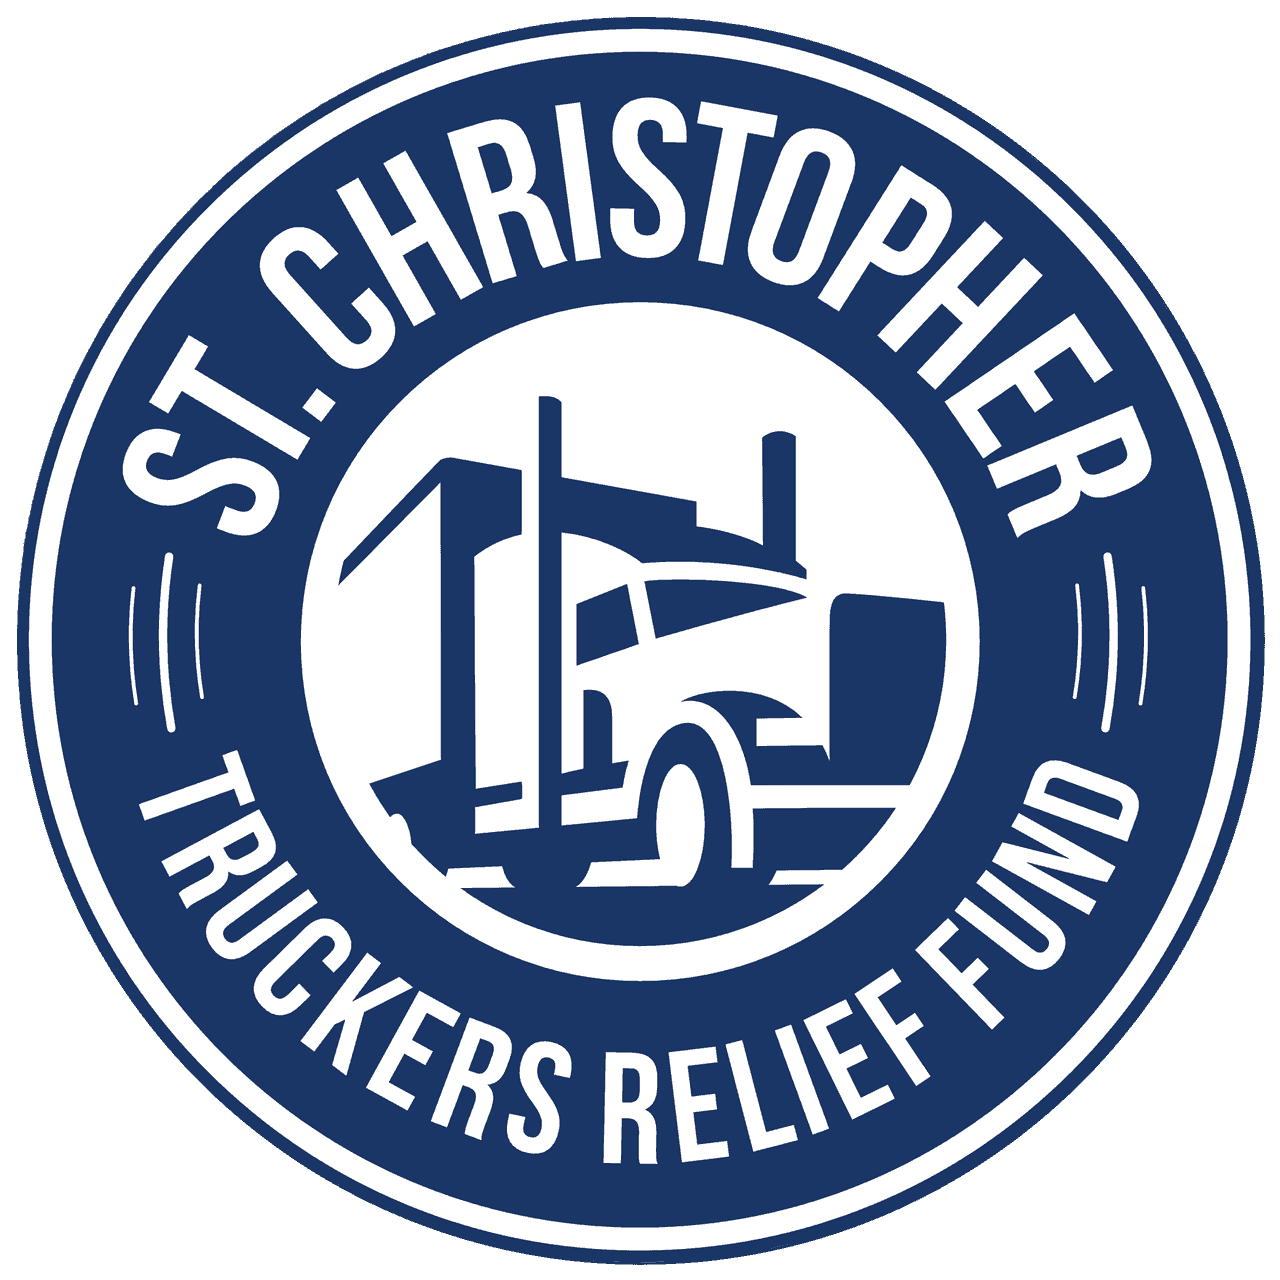 St. Christopher Truckers Relief Fund Celebrates Truck Driver Appreciation Week